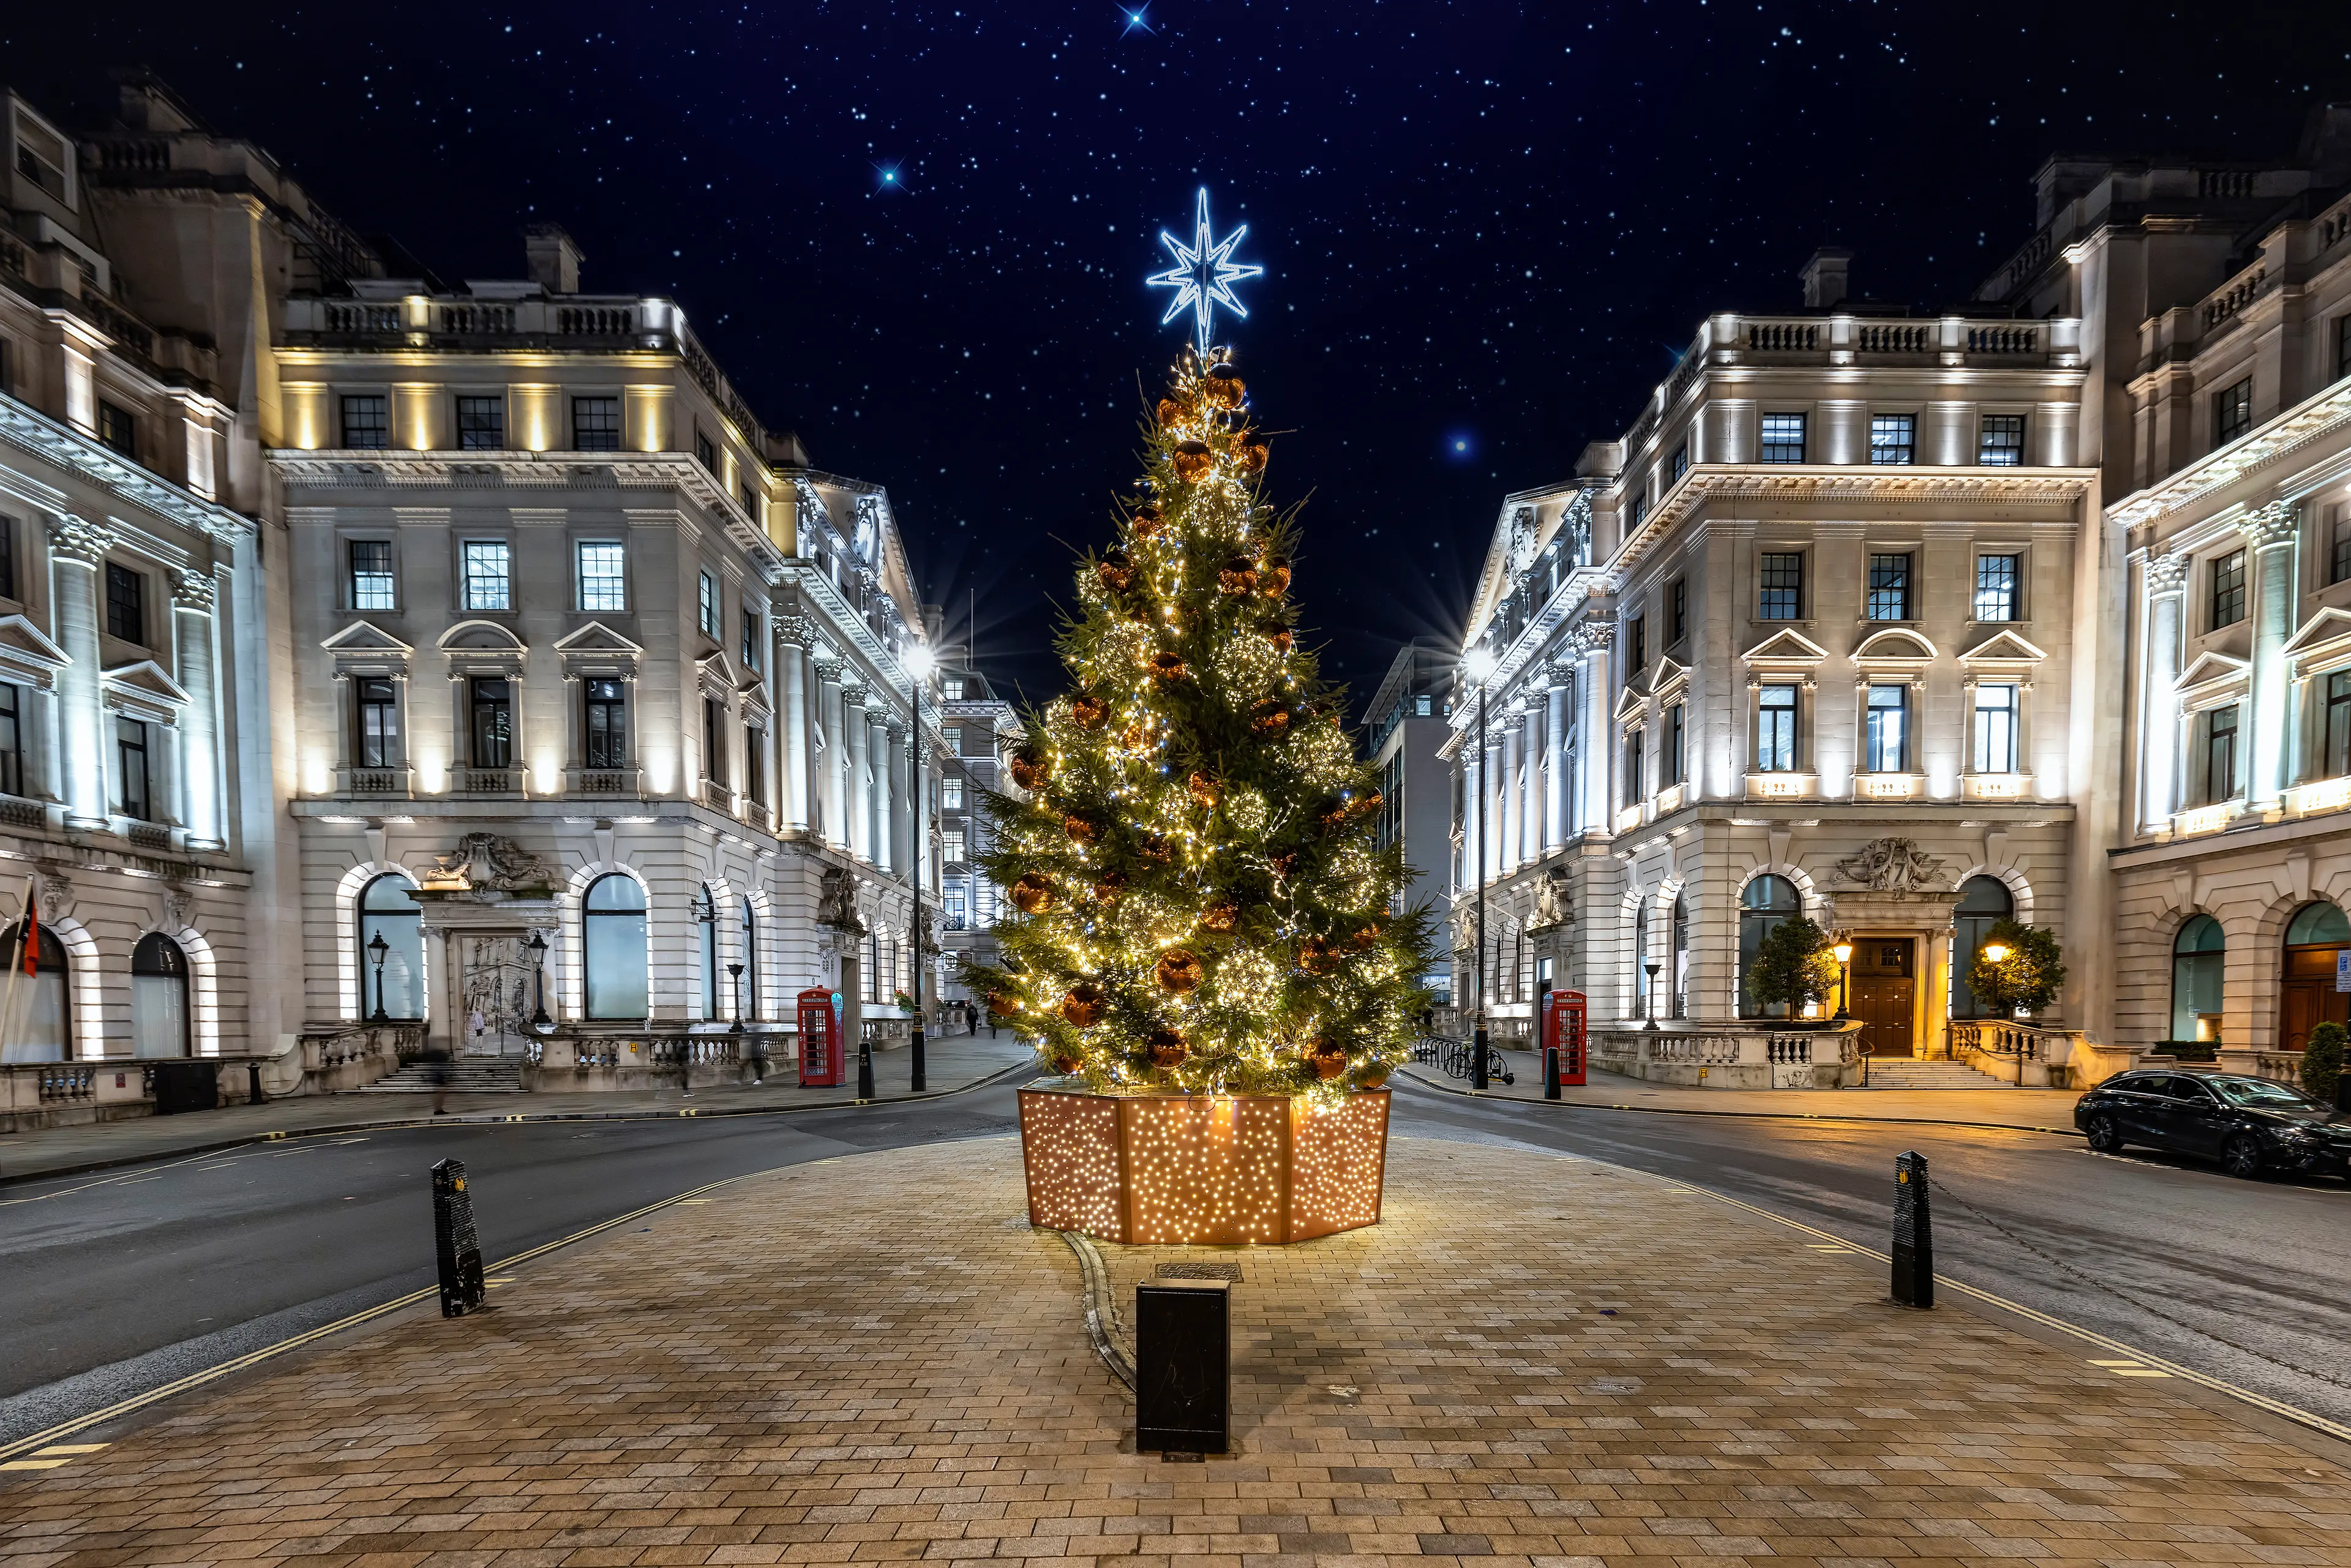 Lit up christmas tree in central London